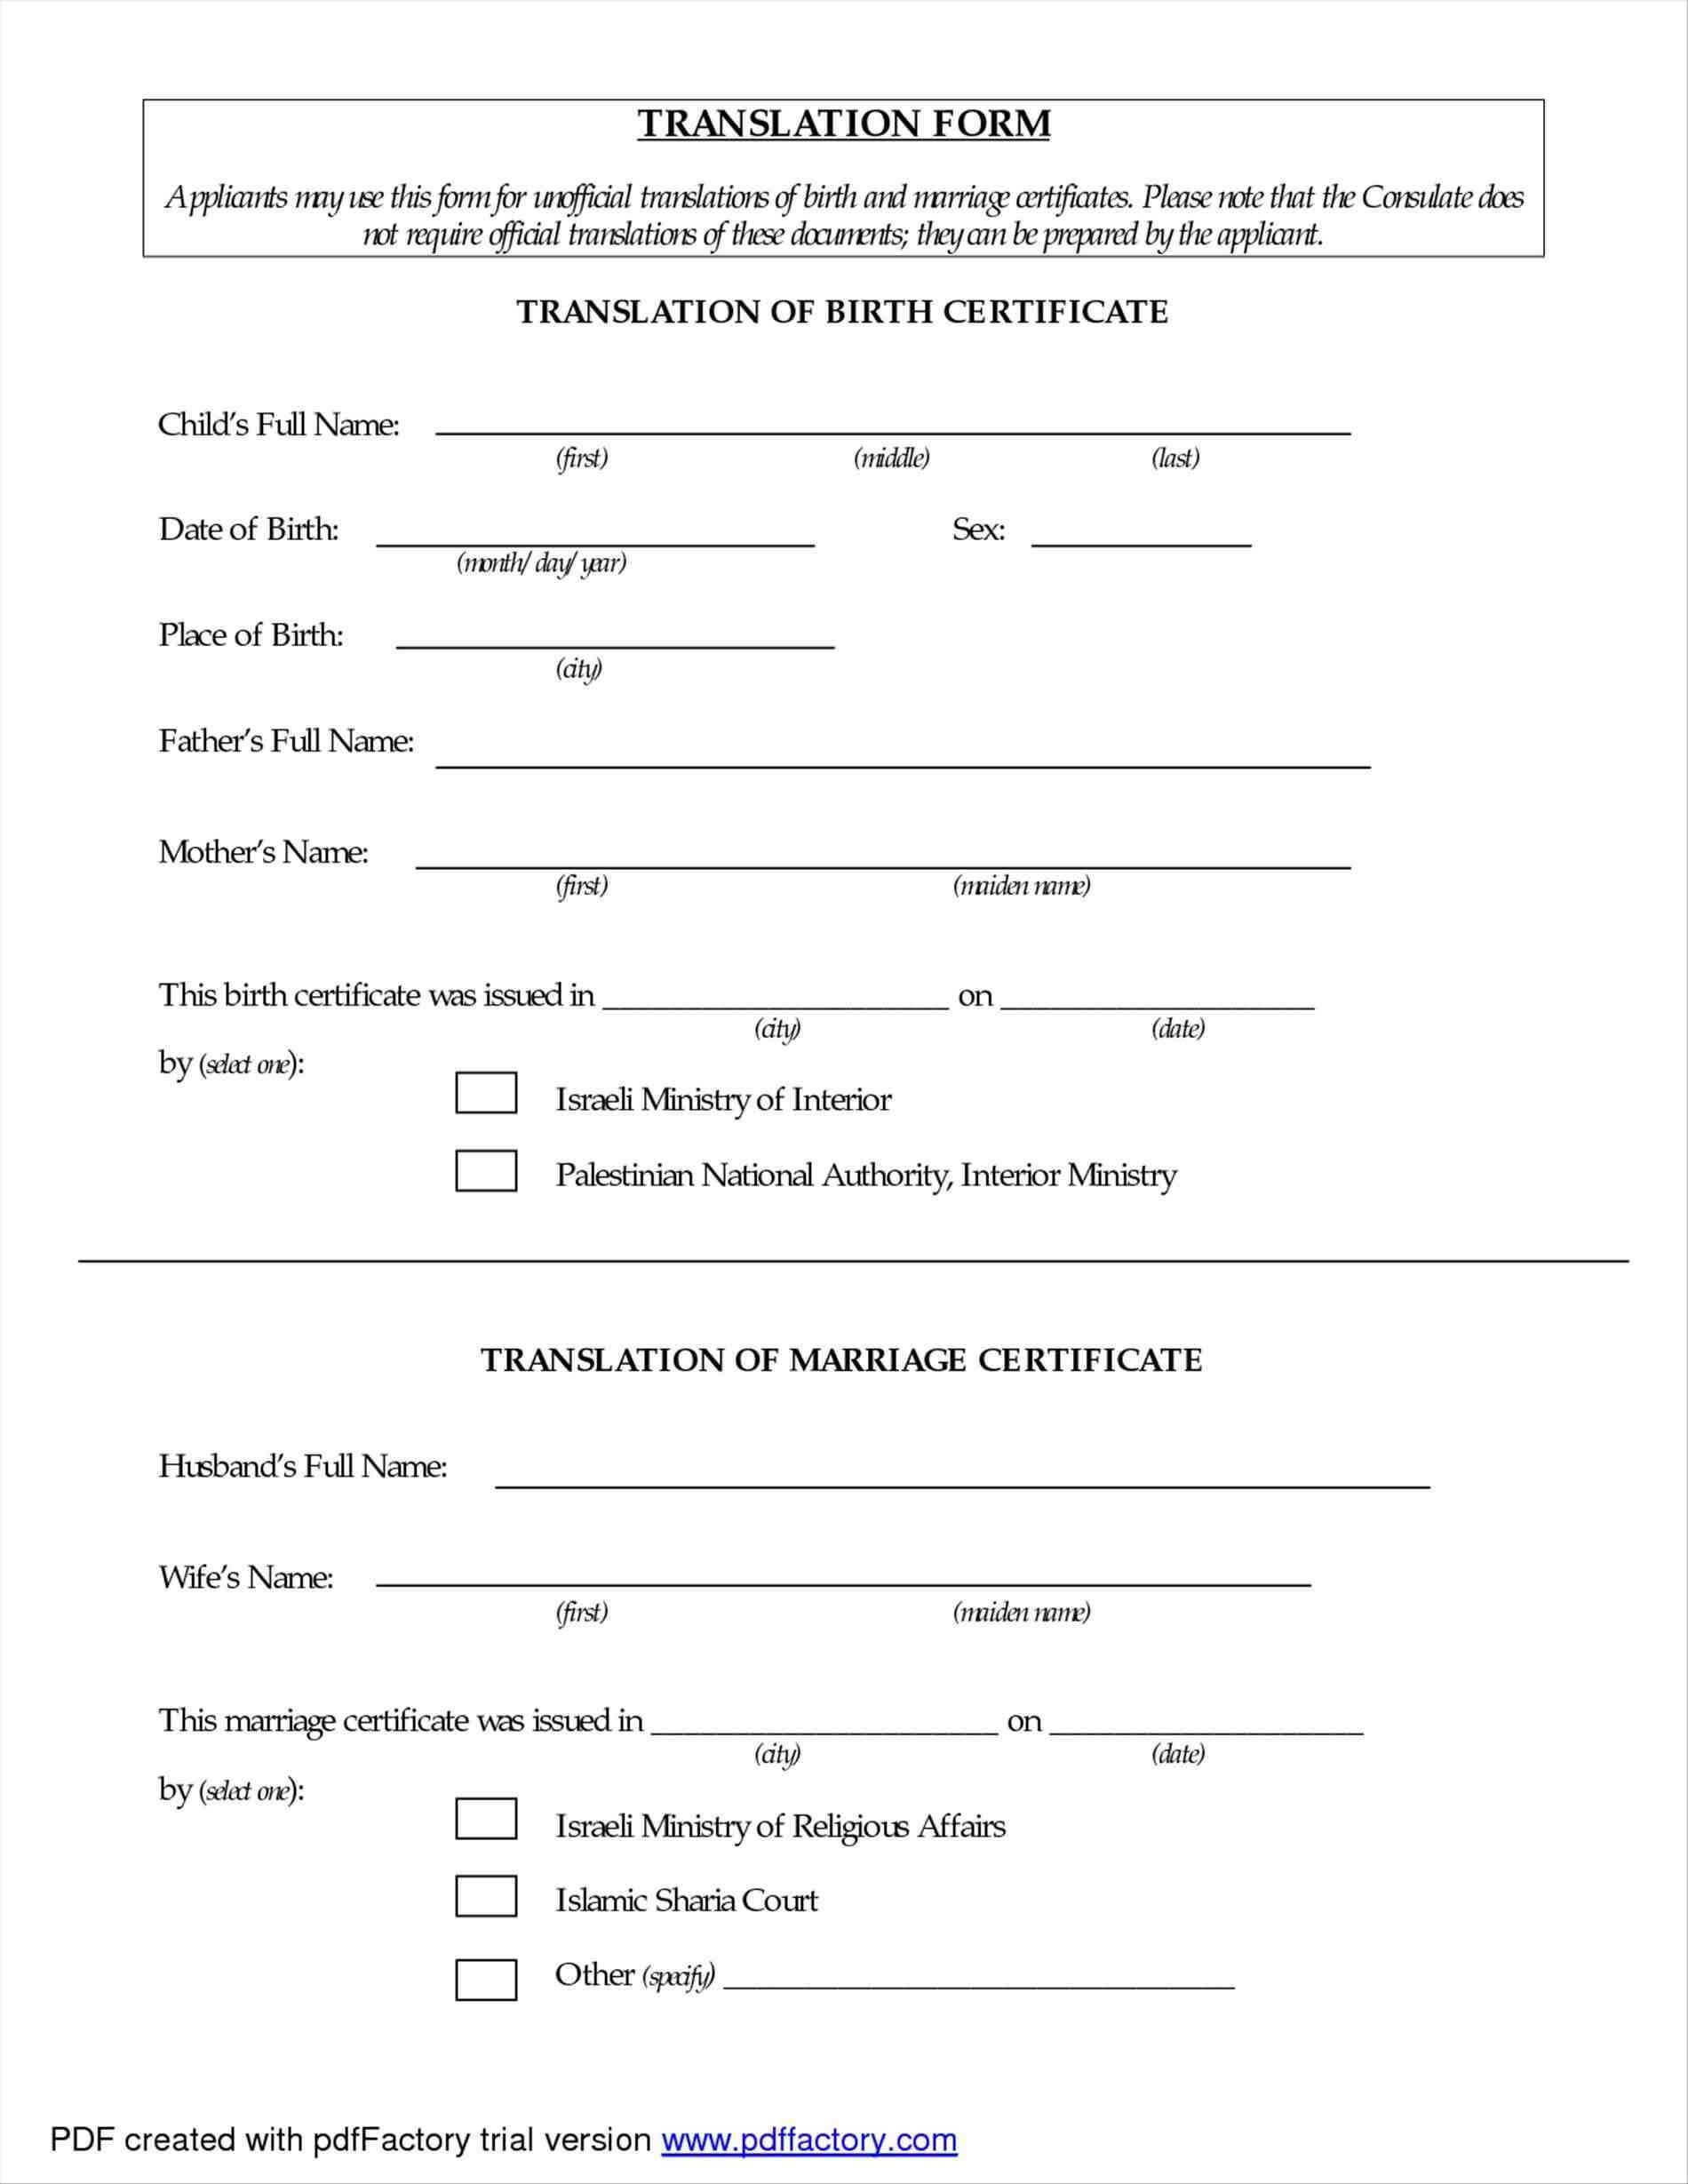 Translate Marriage Certificate From Spanish To English within Marriage Cert...